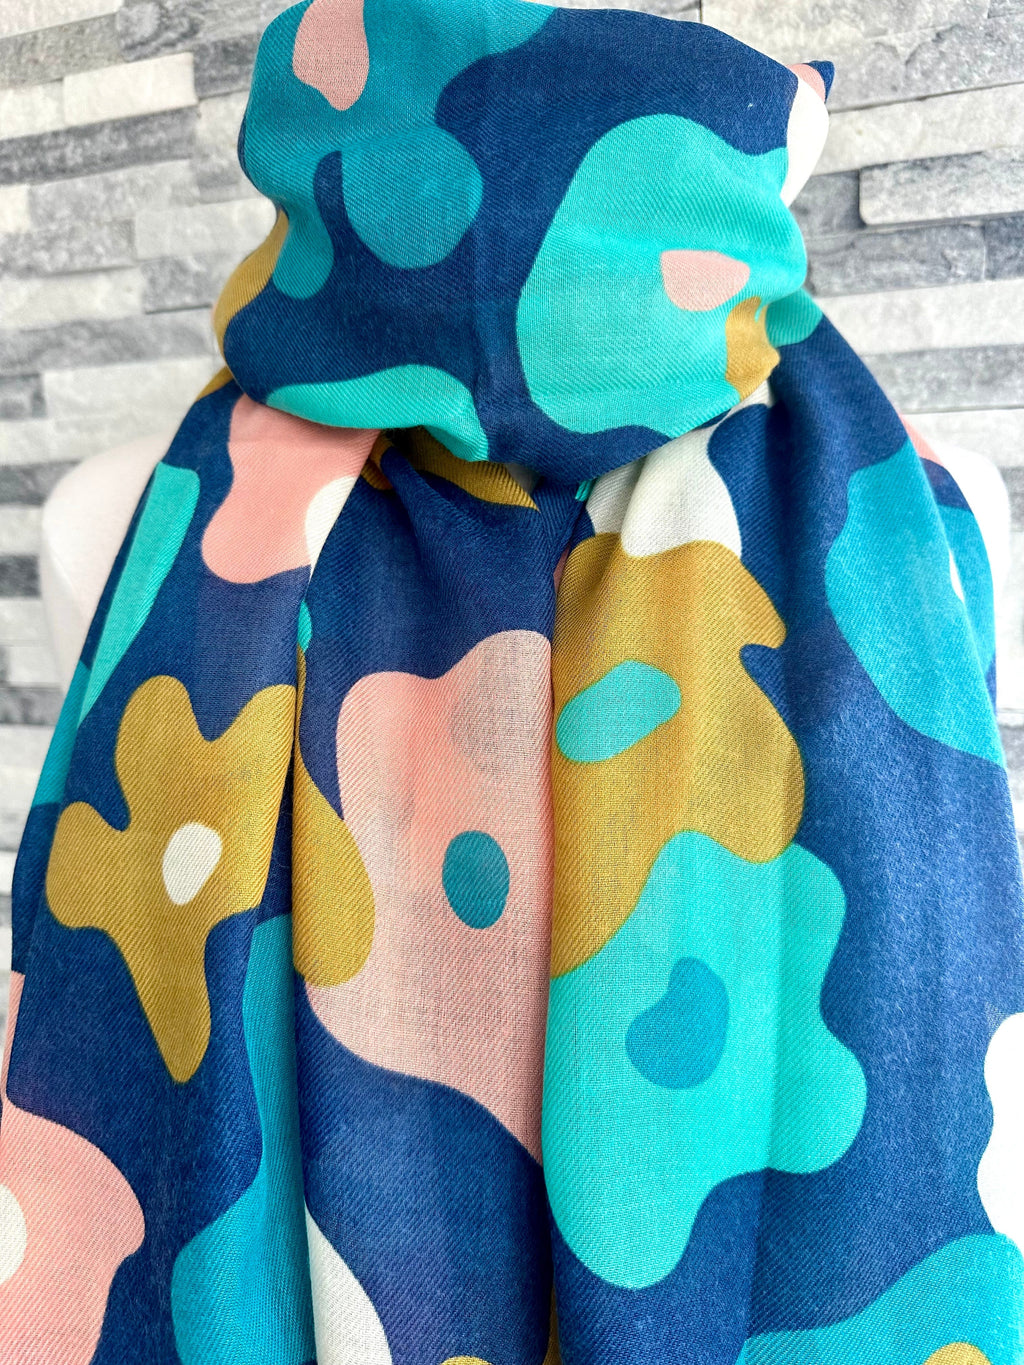 lusciousscarves Red Cuckoo Floral Splodge Scarf, Navy, Turquoise, Mustard and Pale Pink